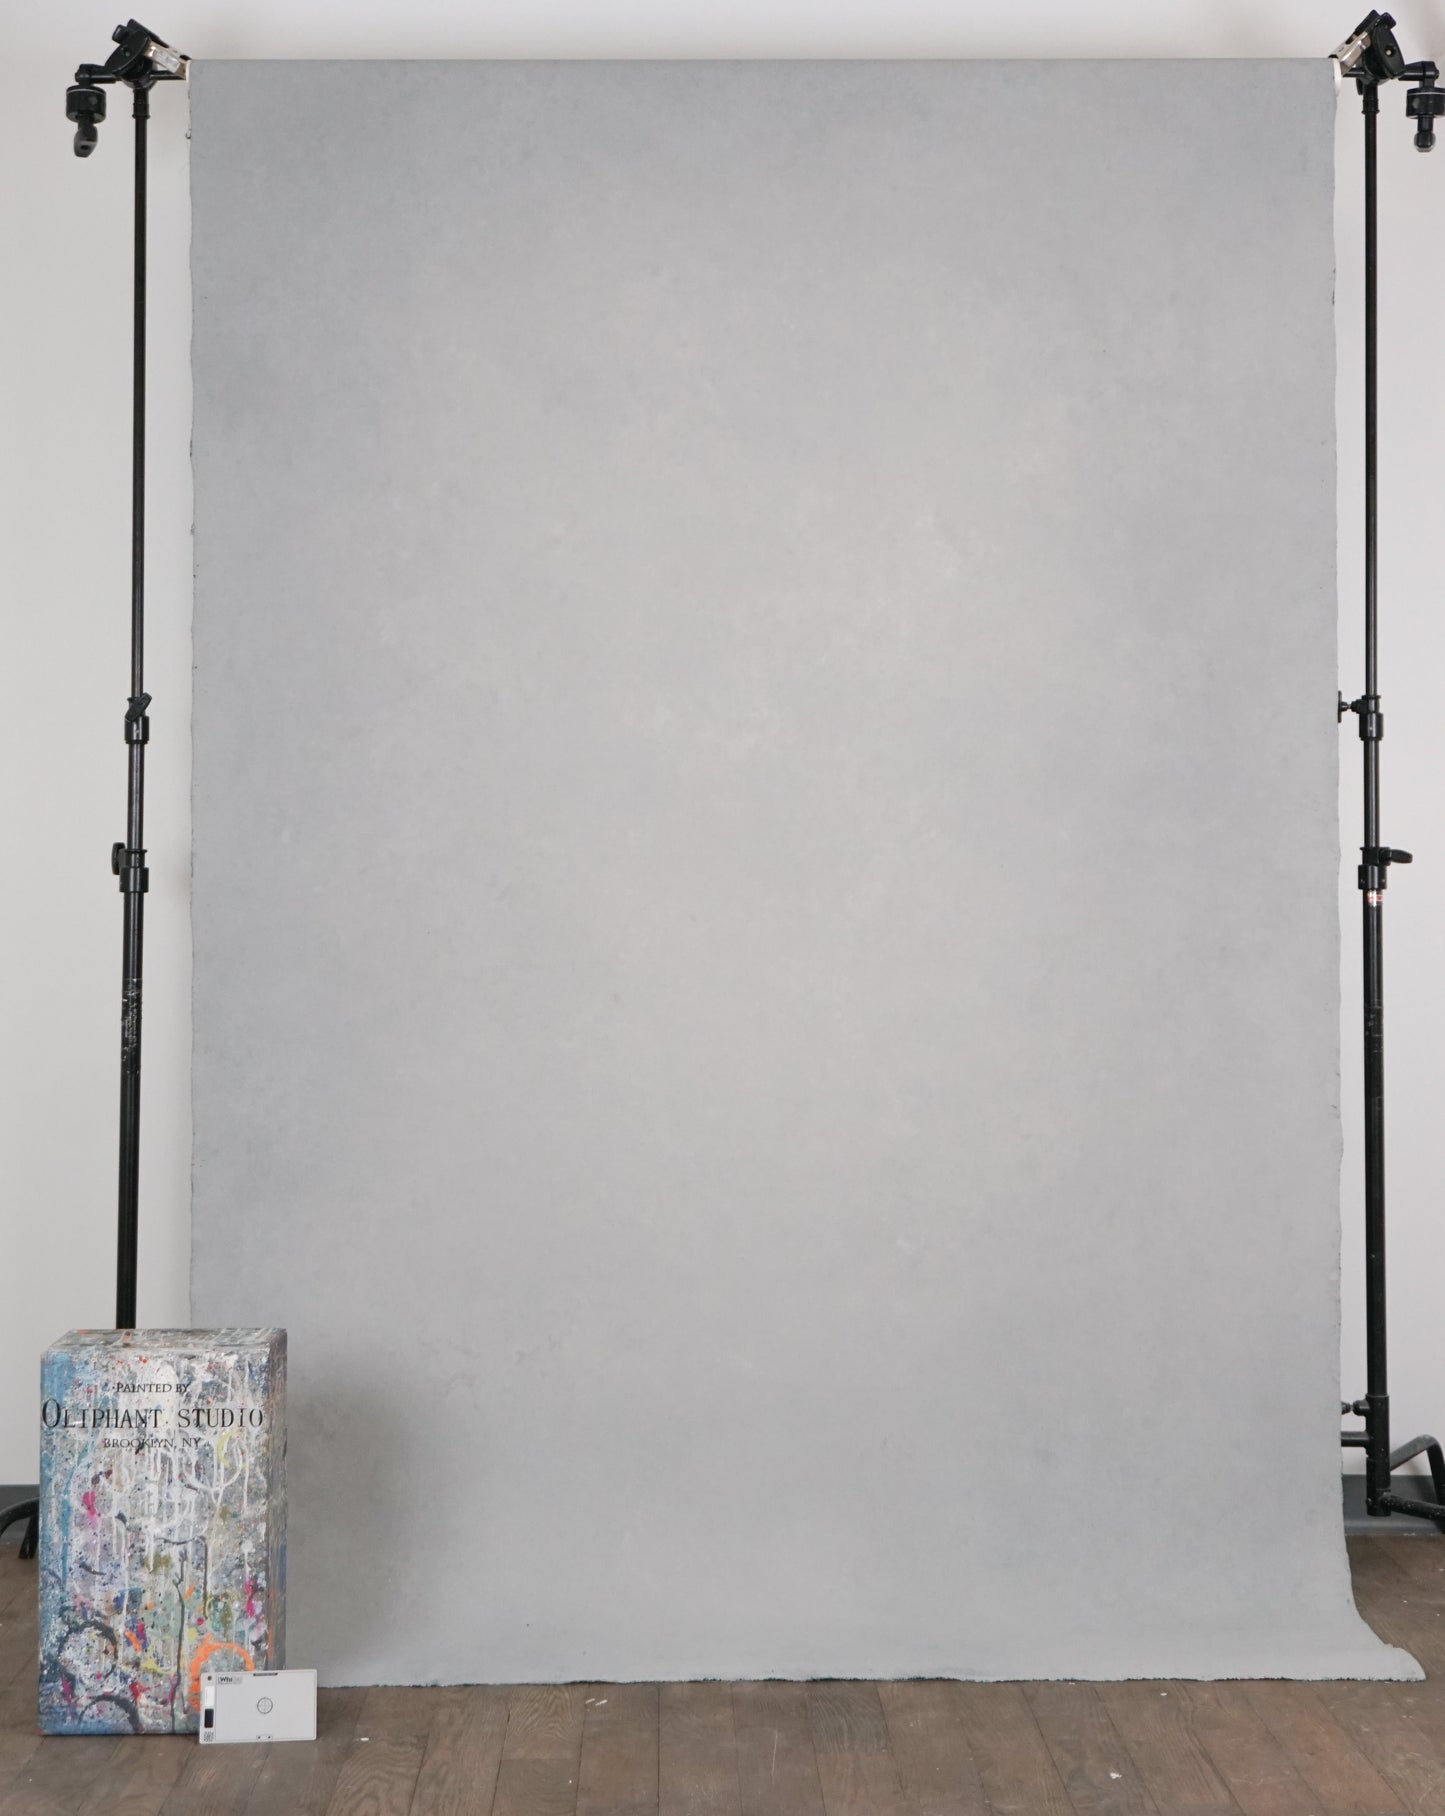 S-697 (5'11" x 9'9") Double Sided